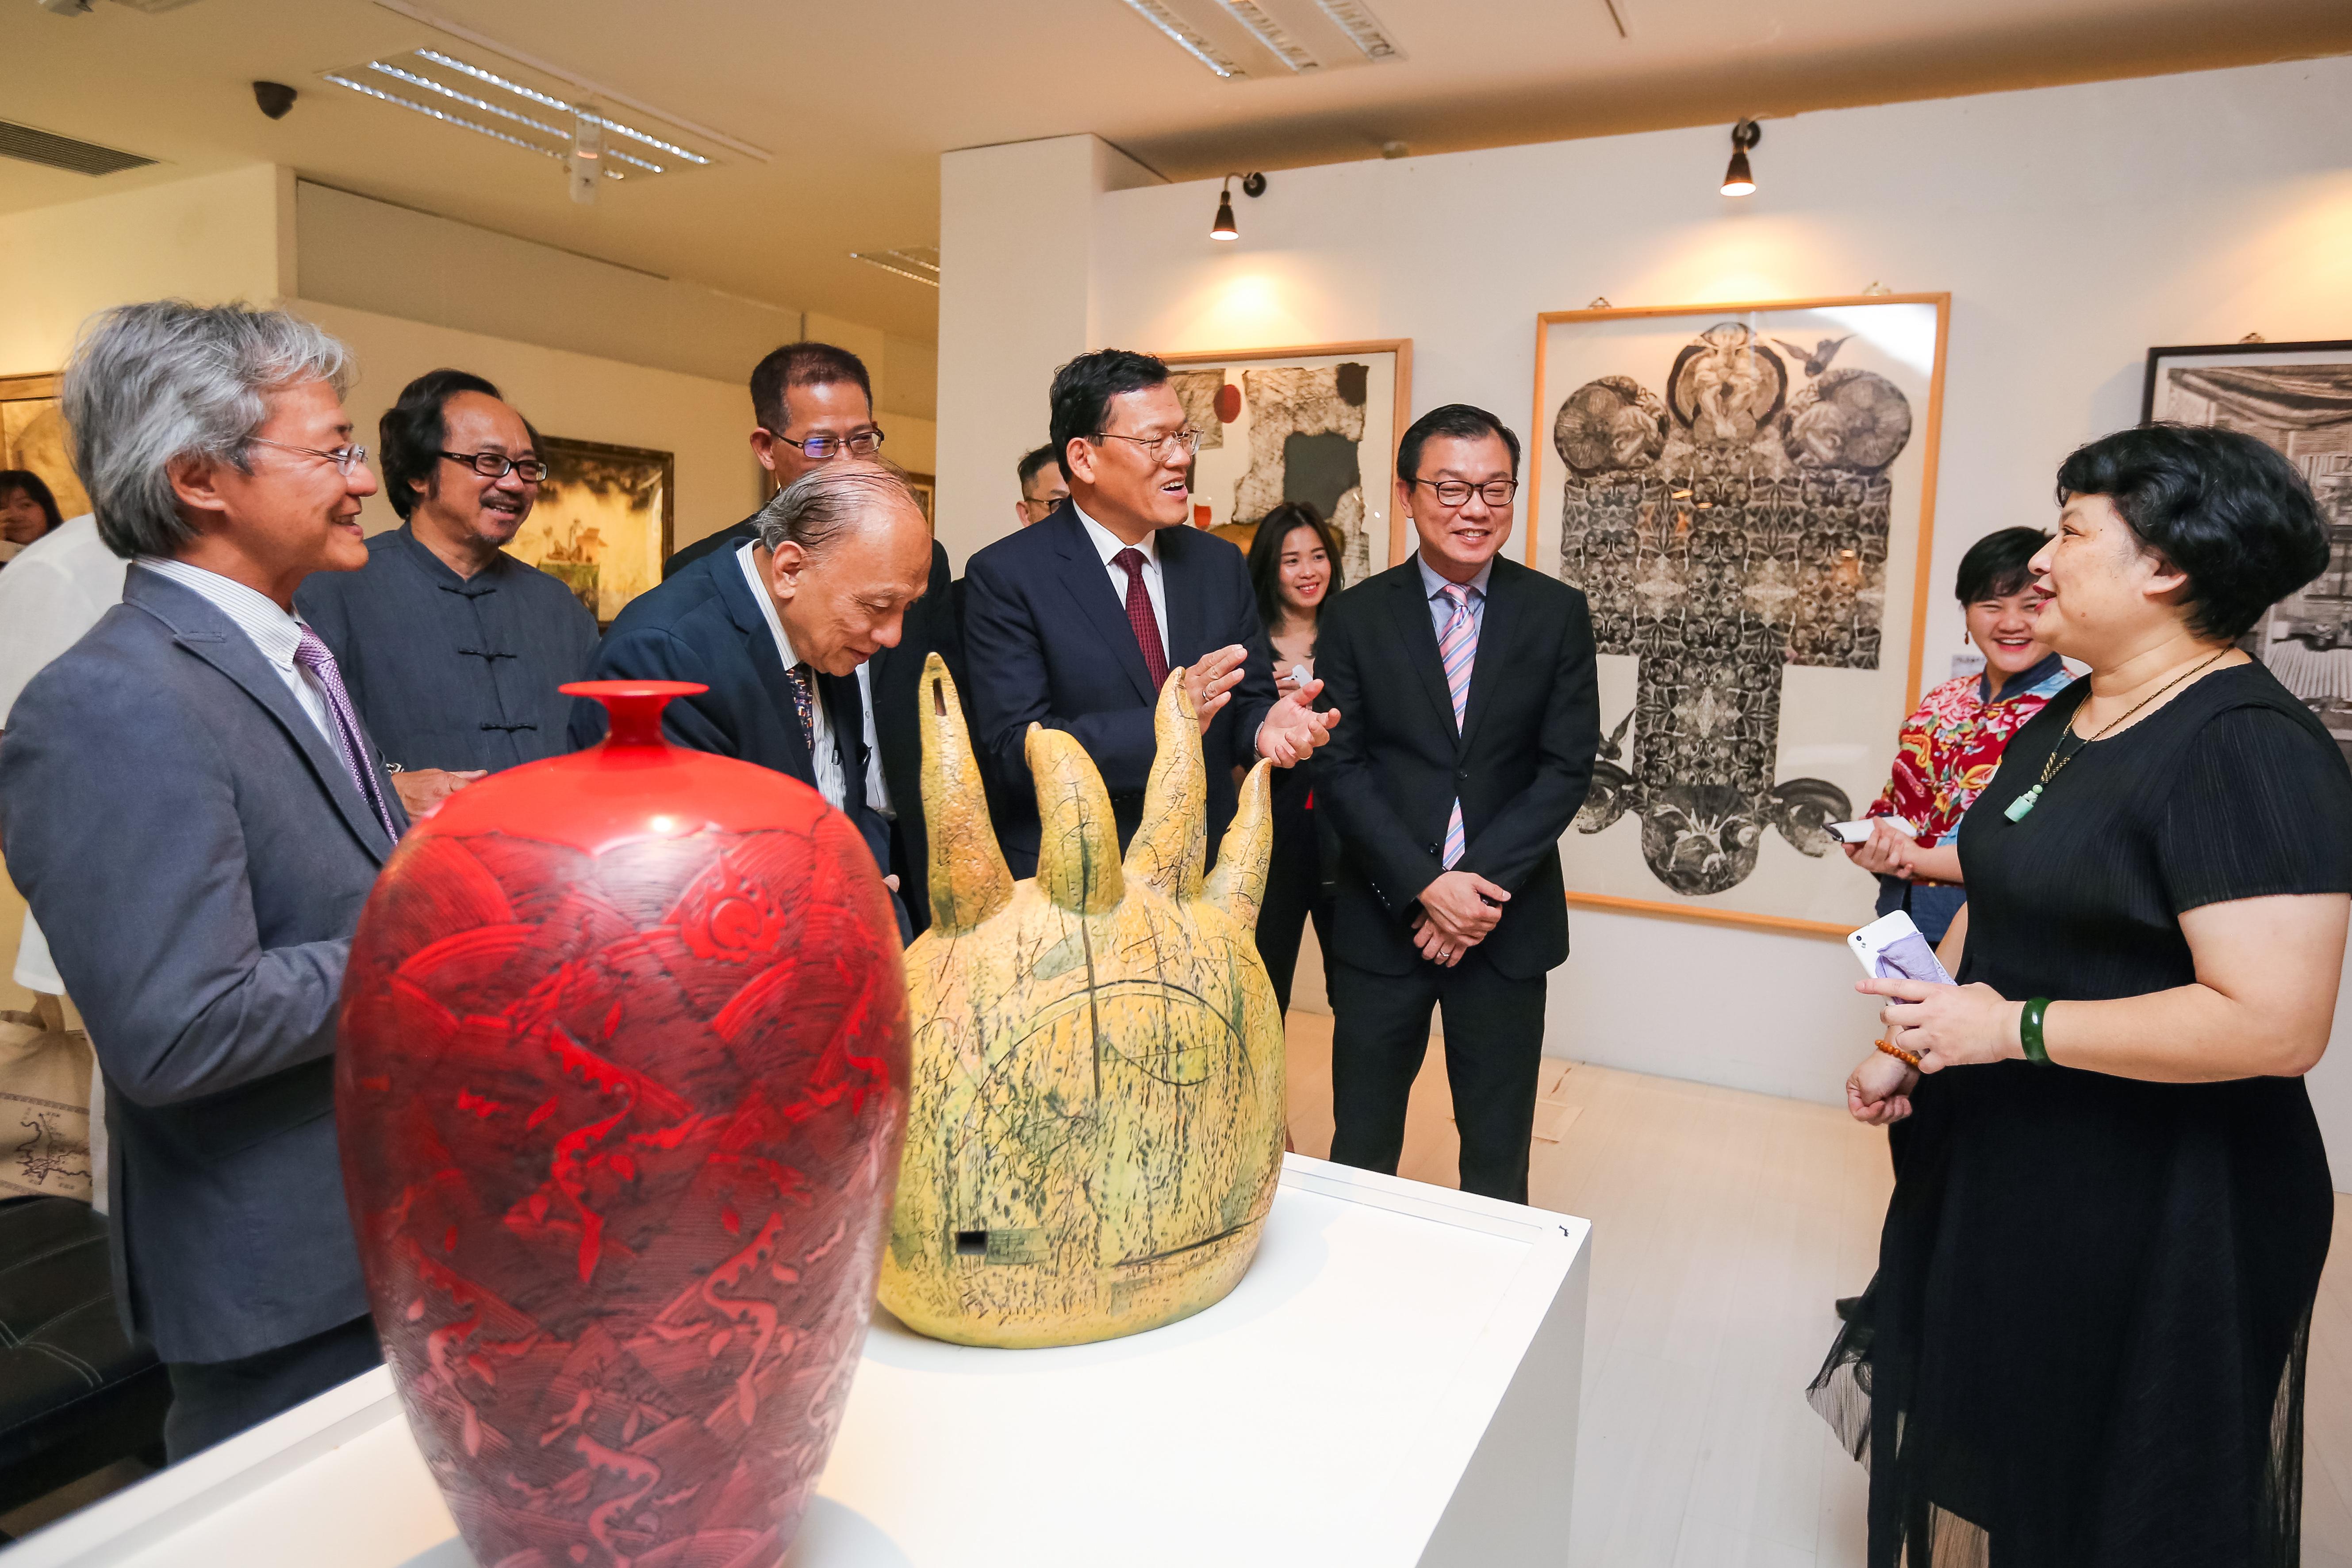 An exhibition tour guided by Taichung City Government representative, Chang, Yueh-Fen (first from right) was getting great response from the guests.